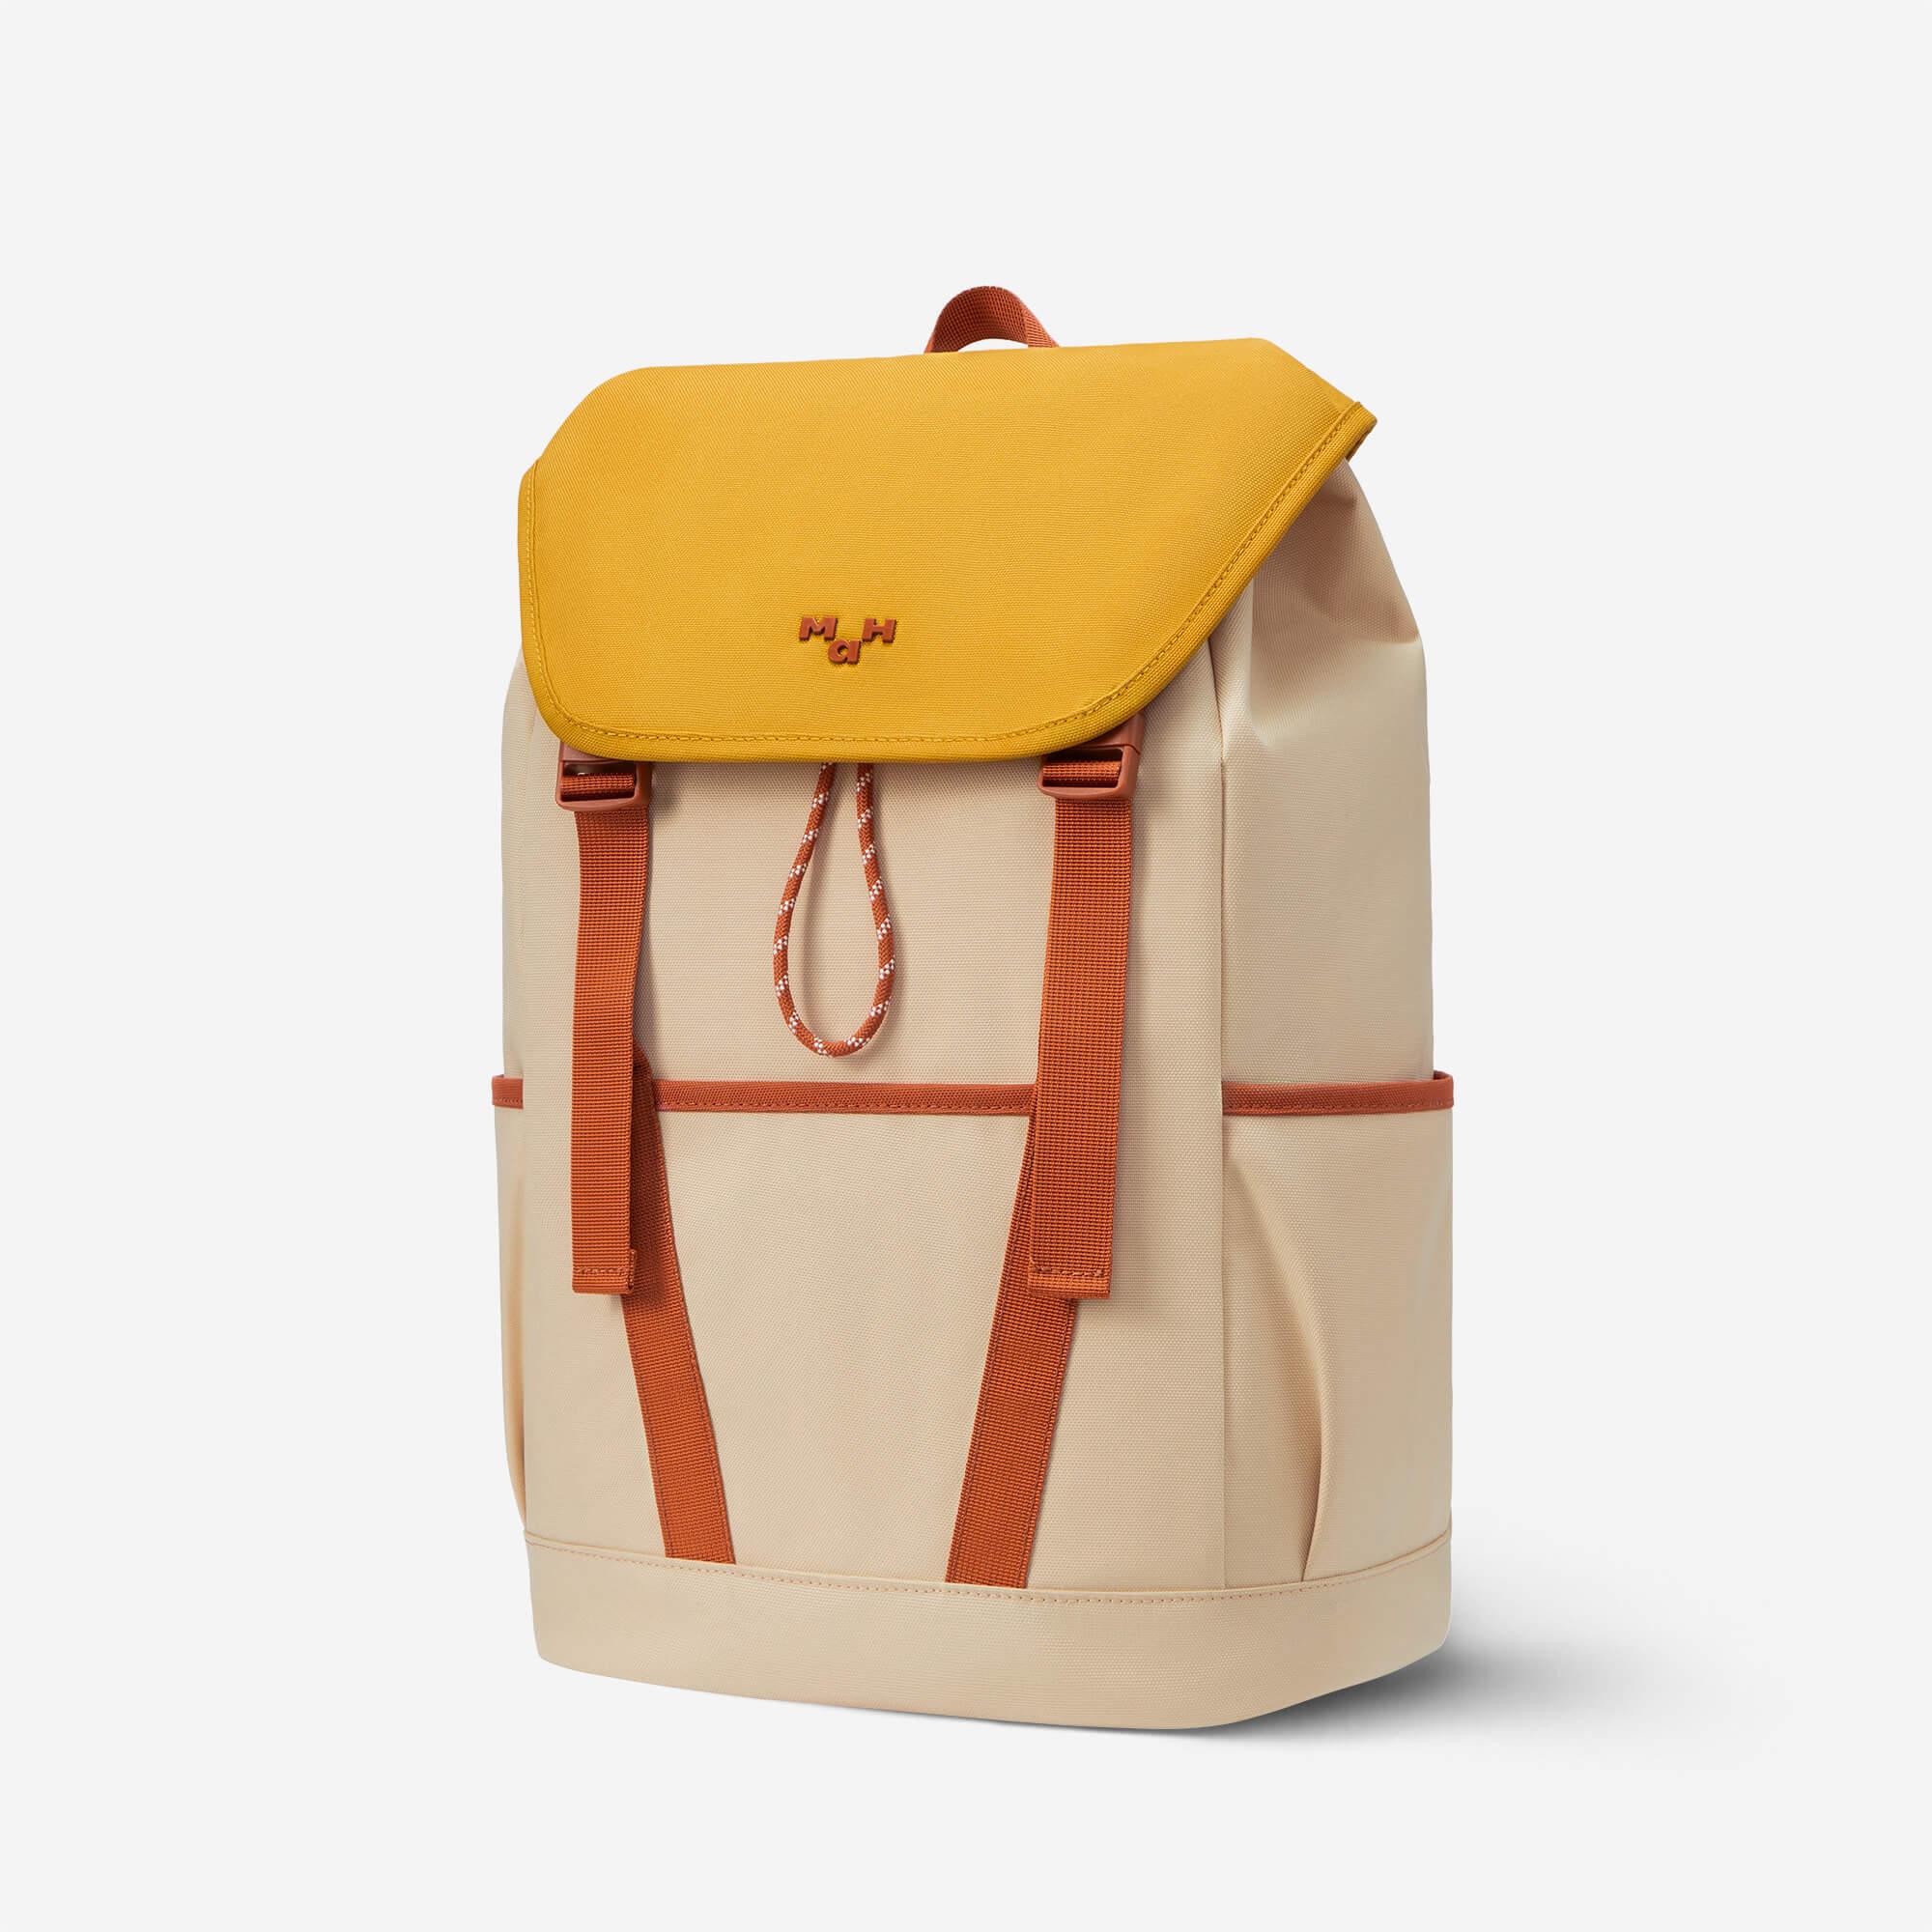 17 Inch Laptop Backpack